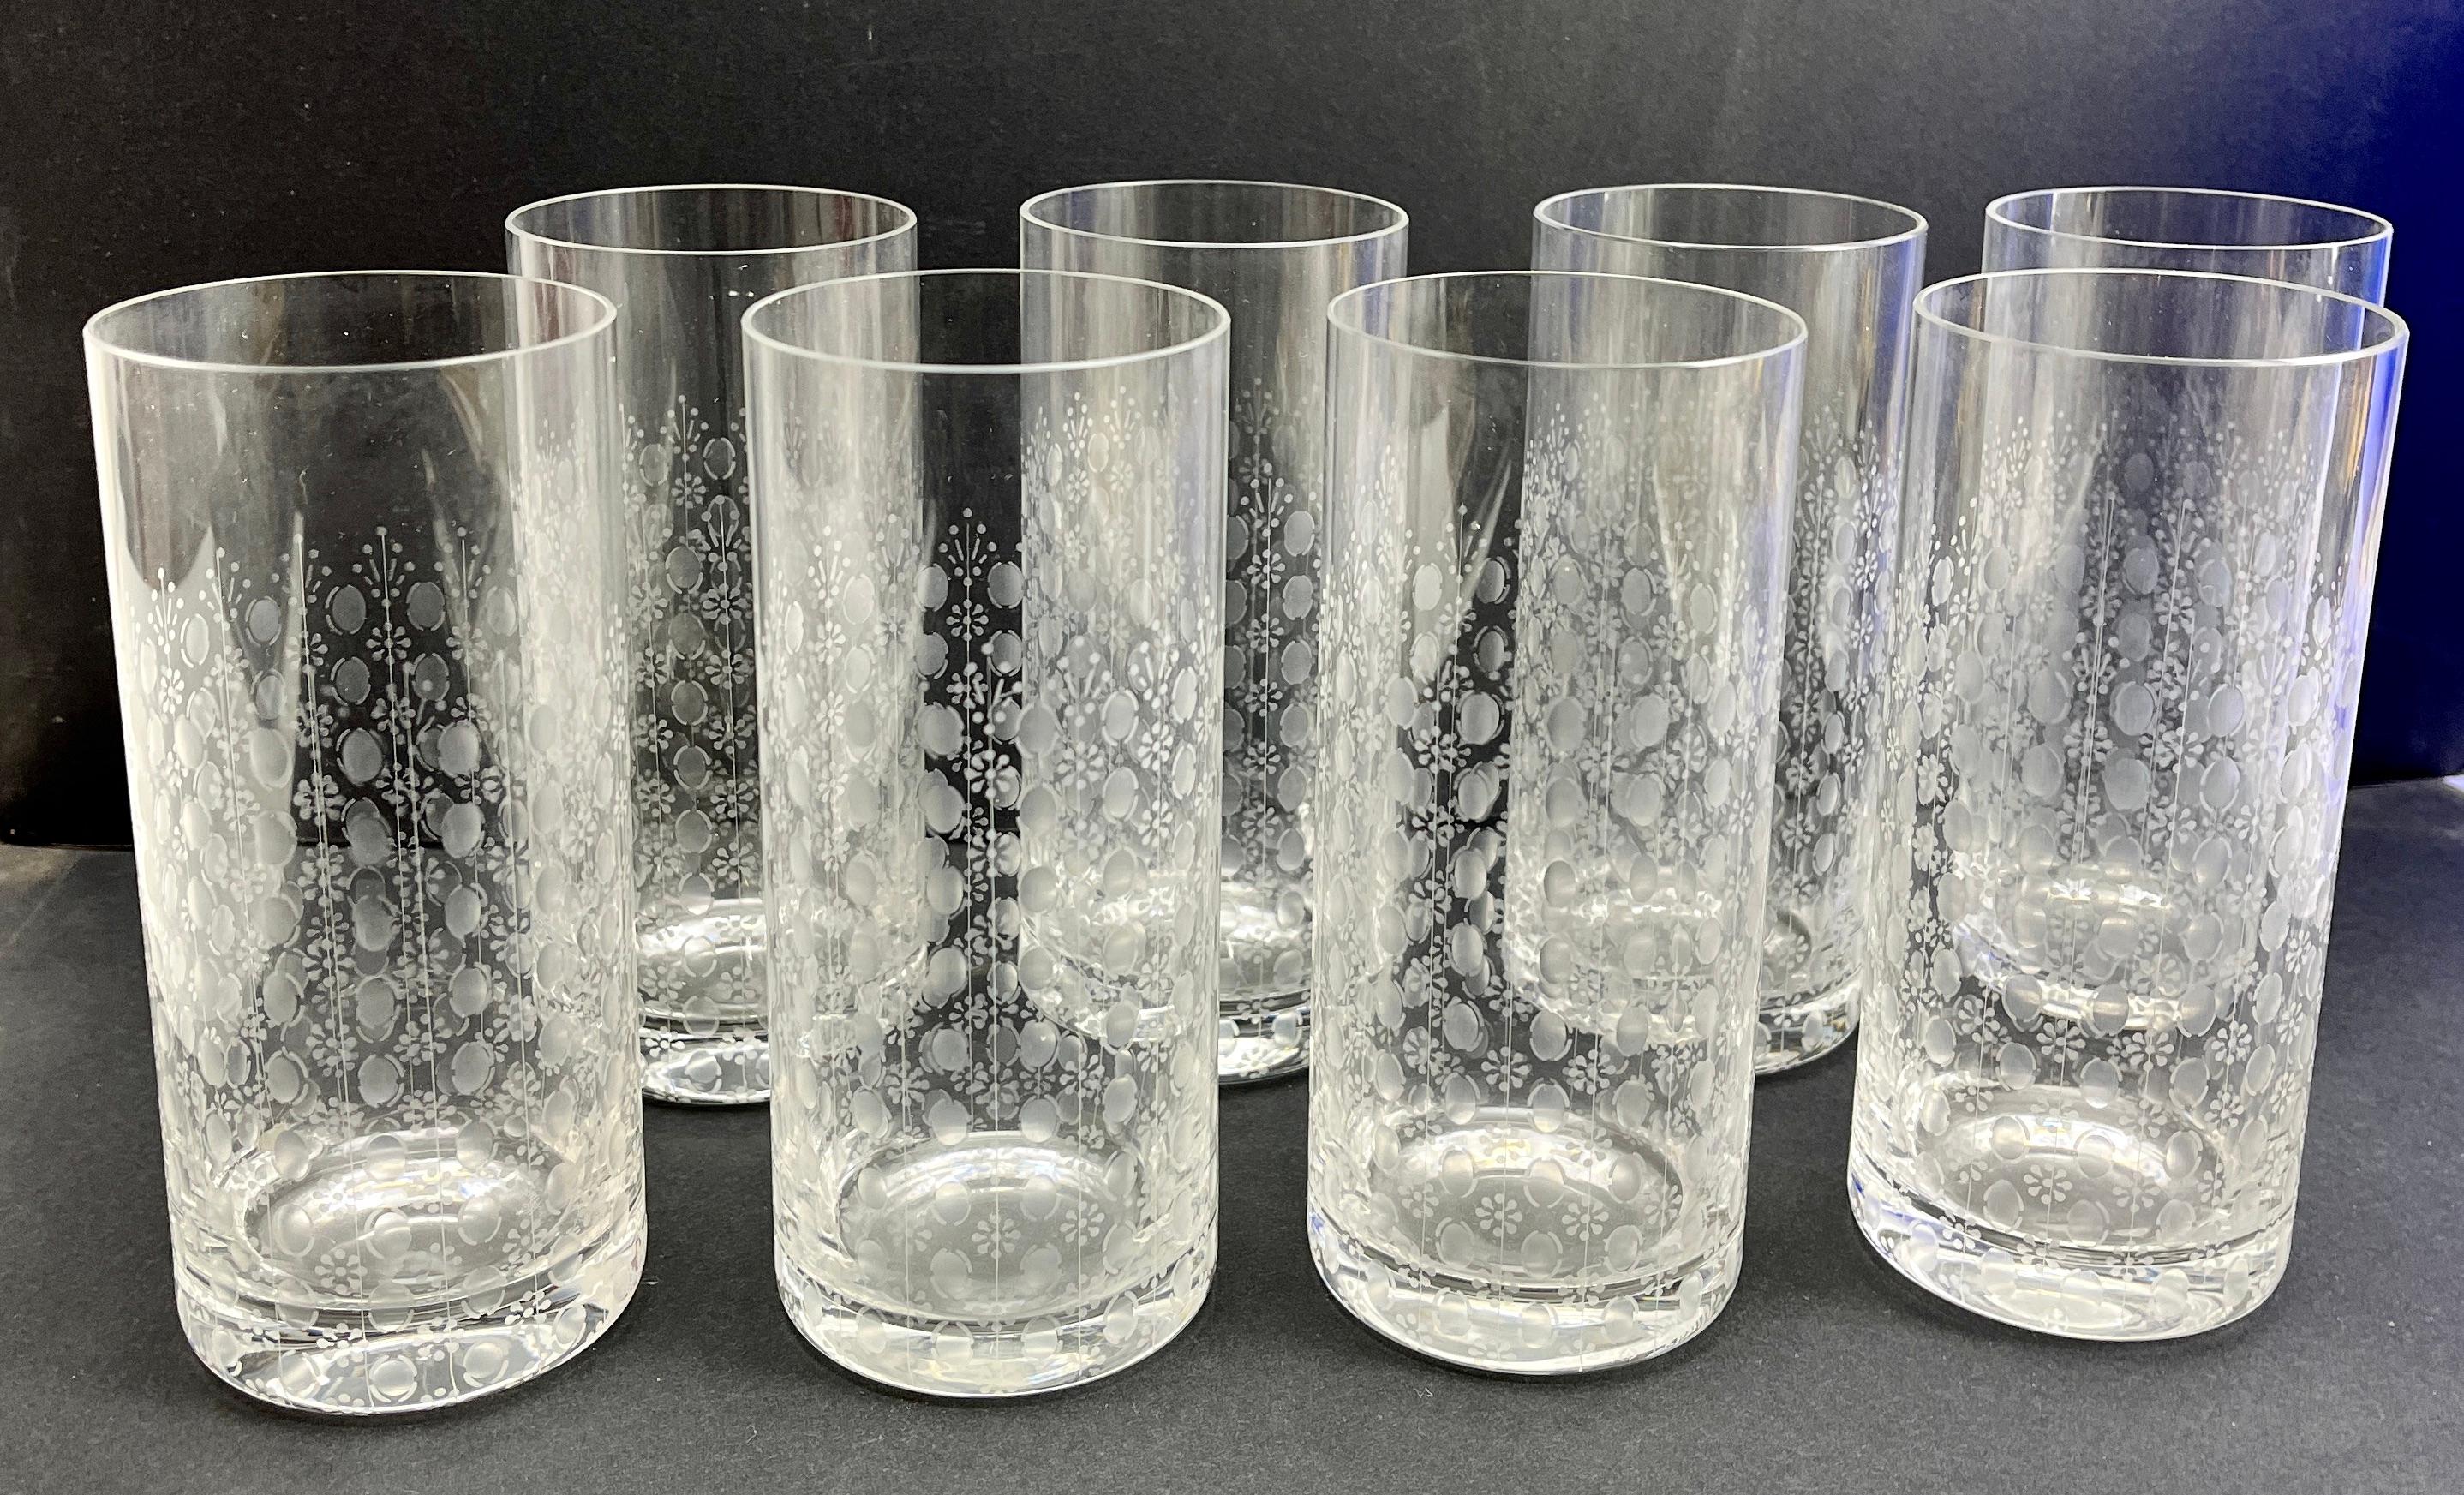 Rosenthal Crystal water glasses Richly Decorated 8 pcs
Photography fails to capture the beauty of the pieces. 
In real-time, they look stunning.  

Very good condition

Please don't hesitate to get in touch with any further questions.  

Best